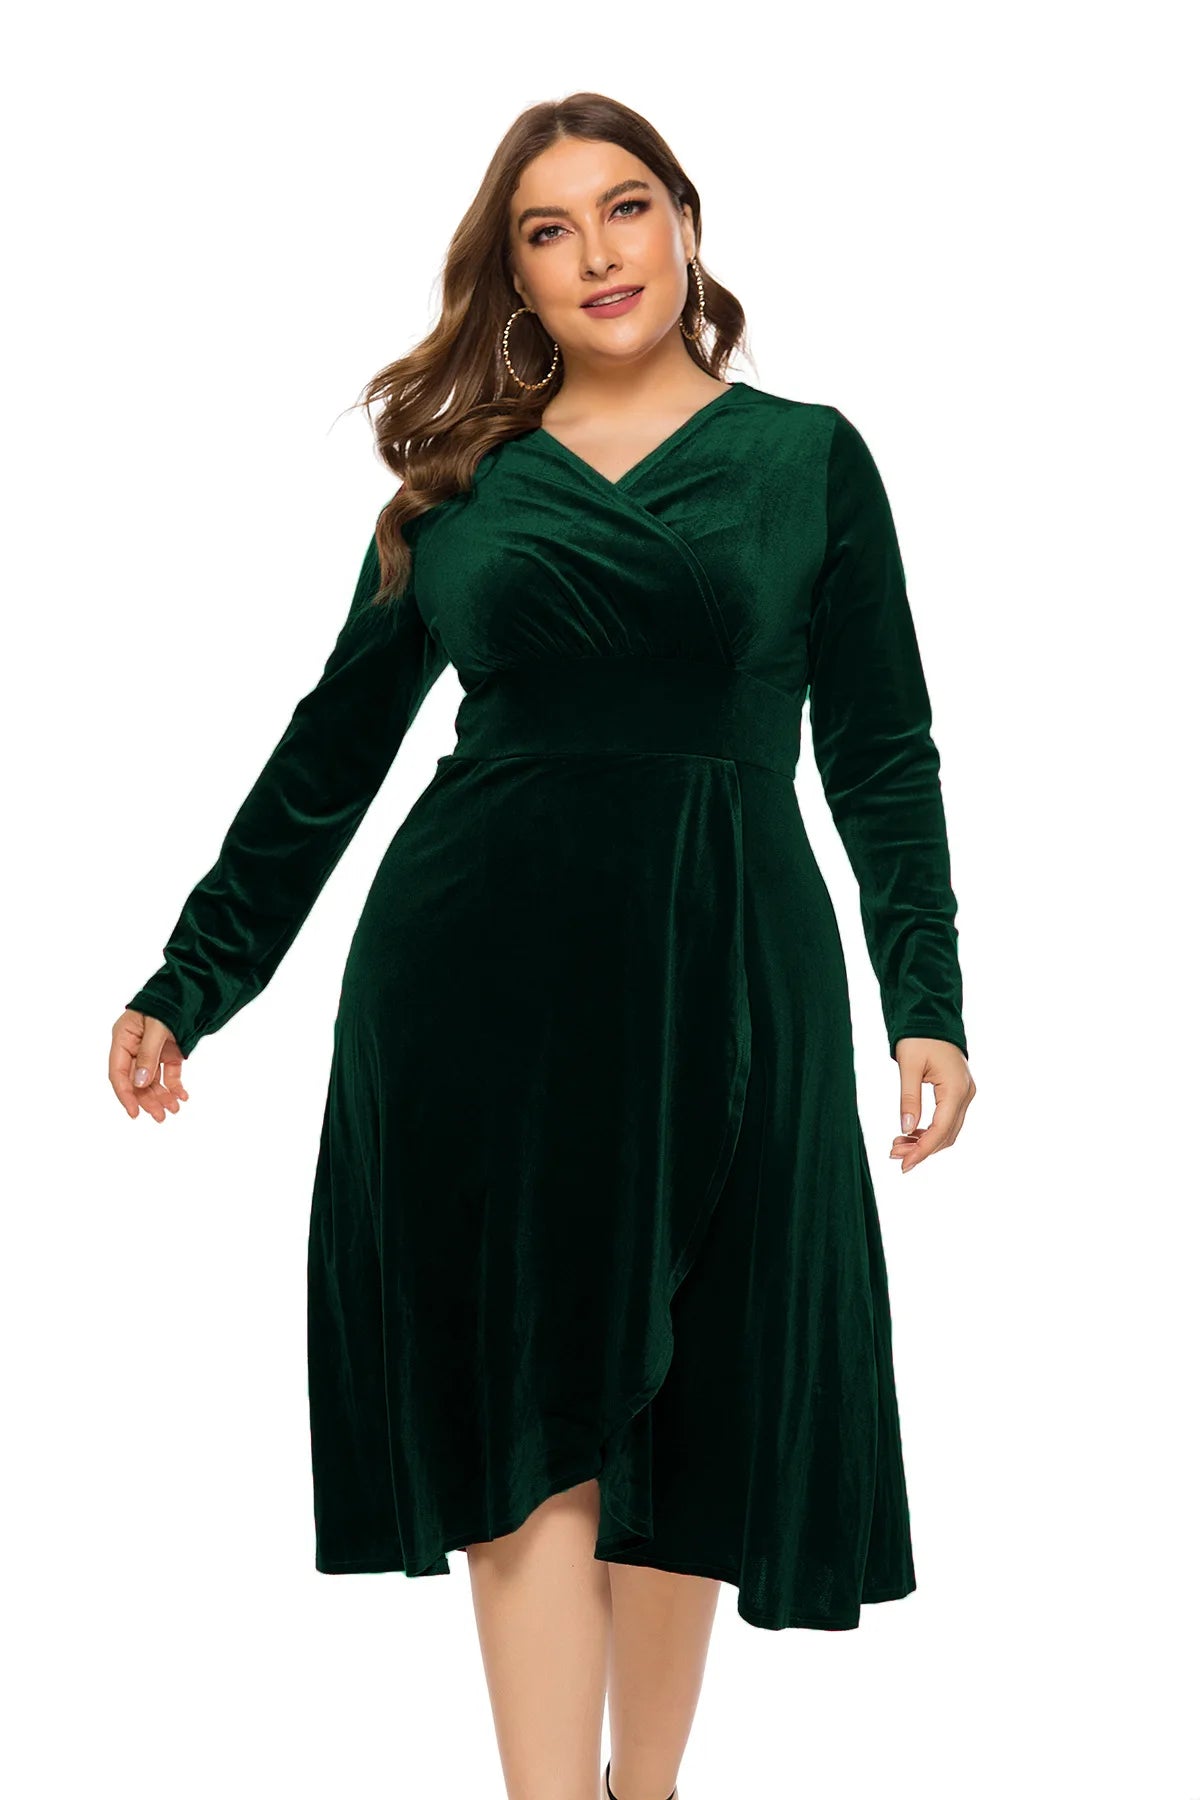 a woman in a green dress